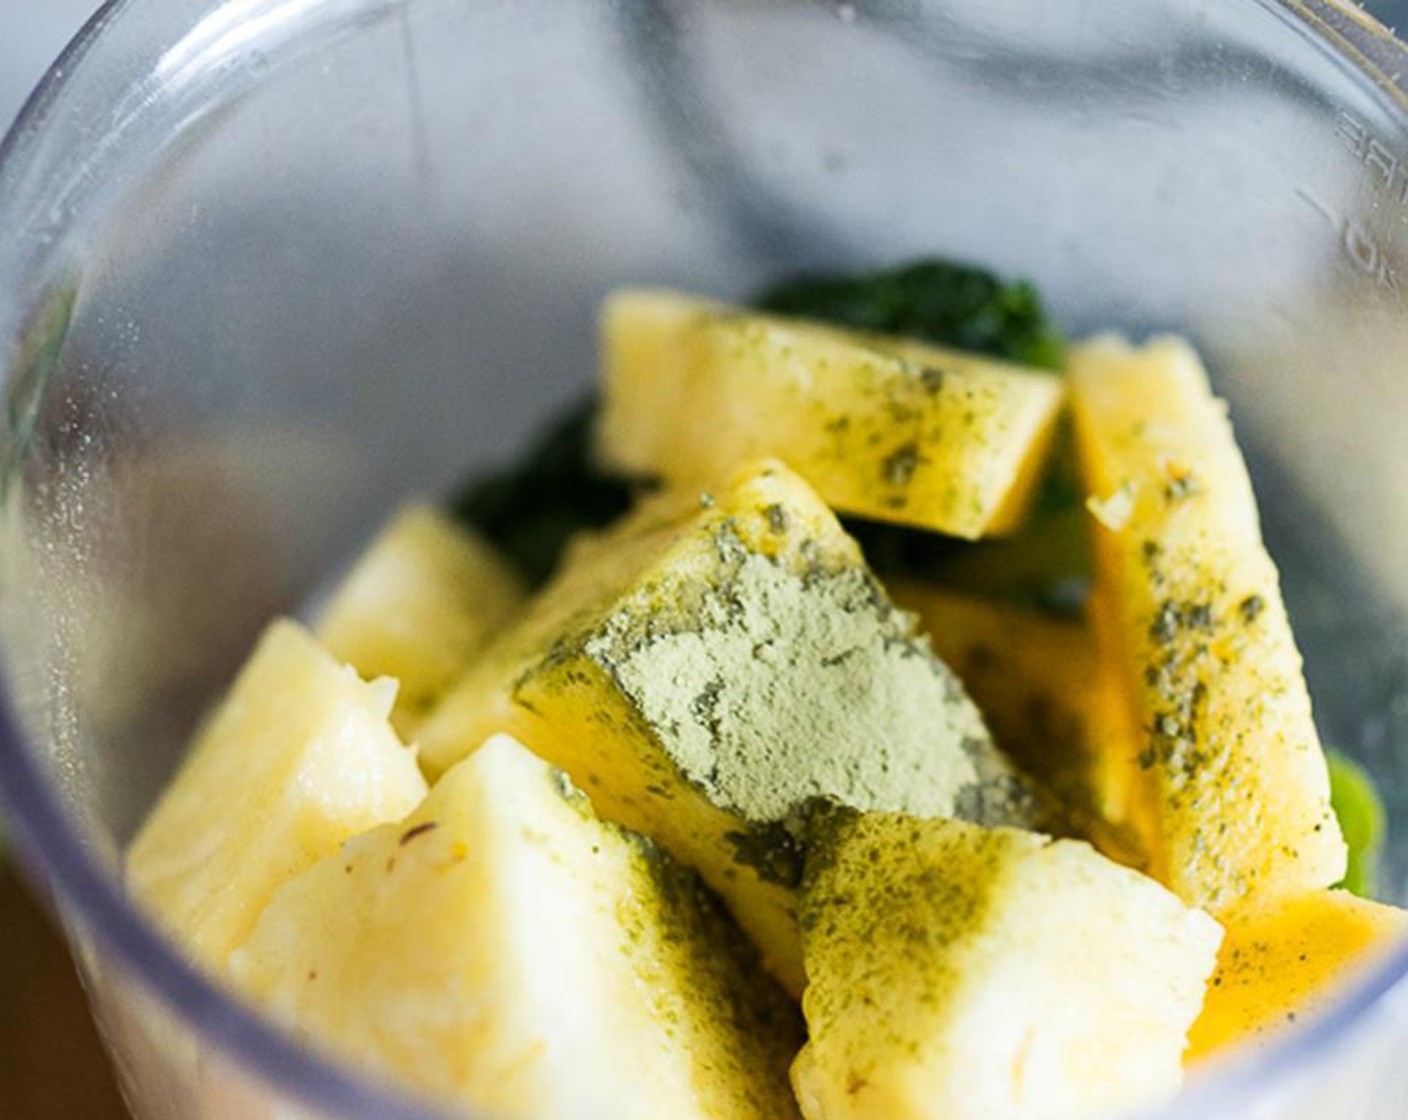 step 1 In a blender, add the Pineapple (1 cup), Banana (1), Kale (1 cup), Matcha Powder (1/2 tsp), Nut Milk (1/2 cup), a squeeze of fresh Lemons (to taste), and Ice (1 handful). Blend until very smooth.